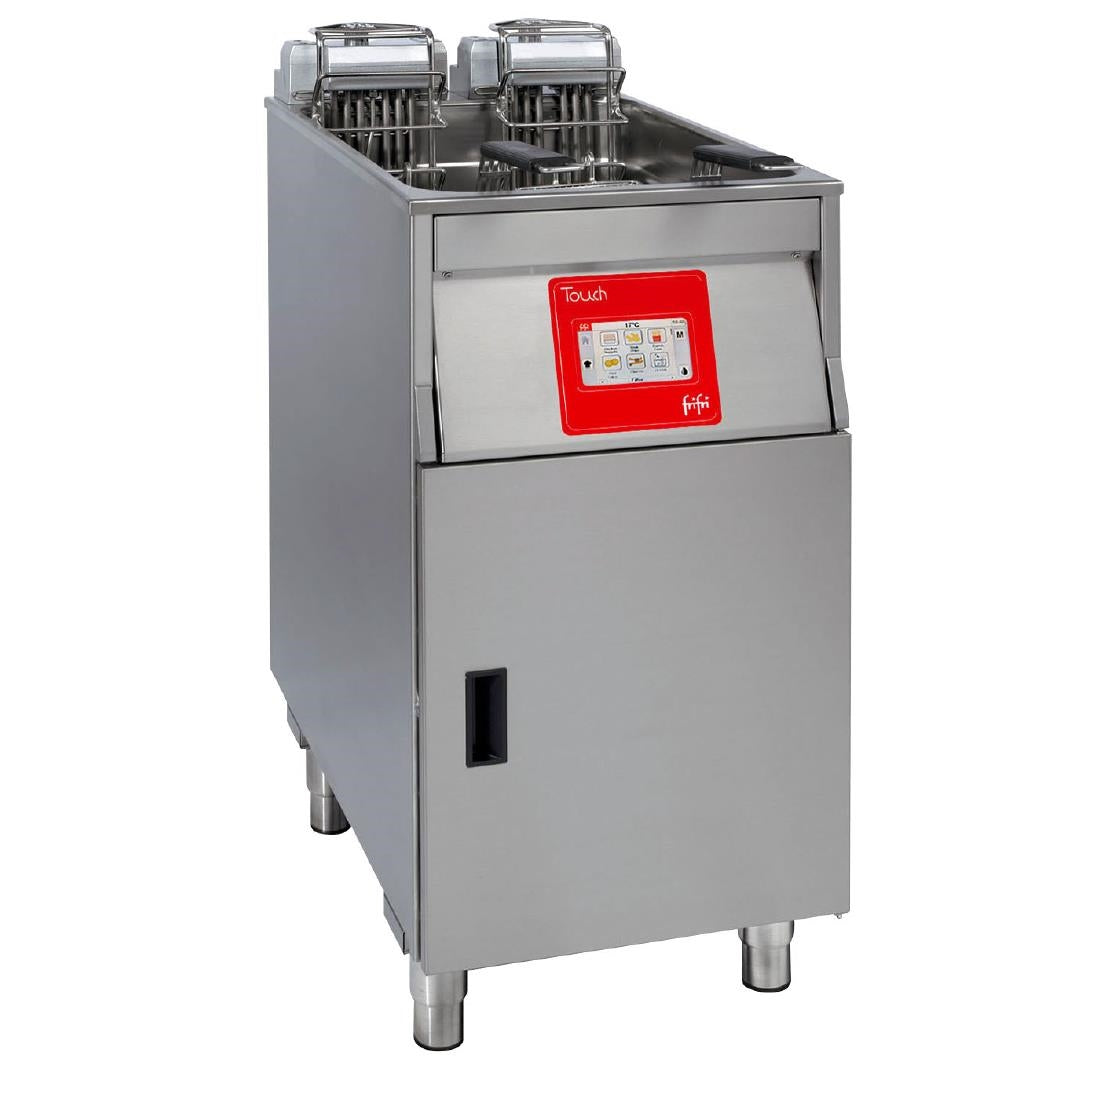 HS009-3PH FriFri Touch 412 Electric Free-Standing Single Tank Fryer 2 Baskets 15kW - Three Phase